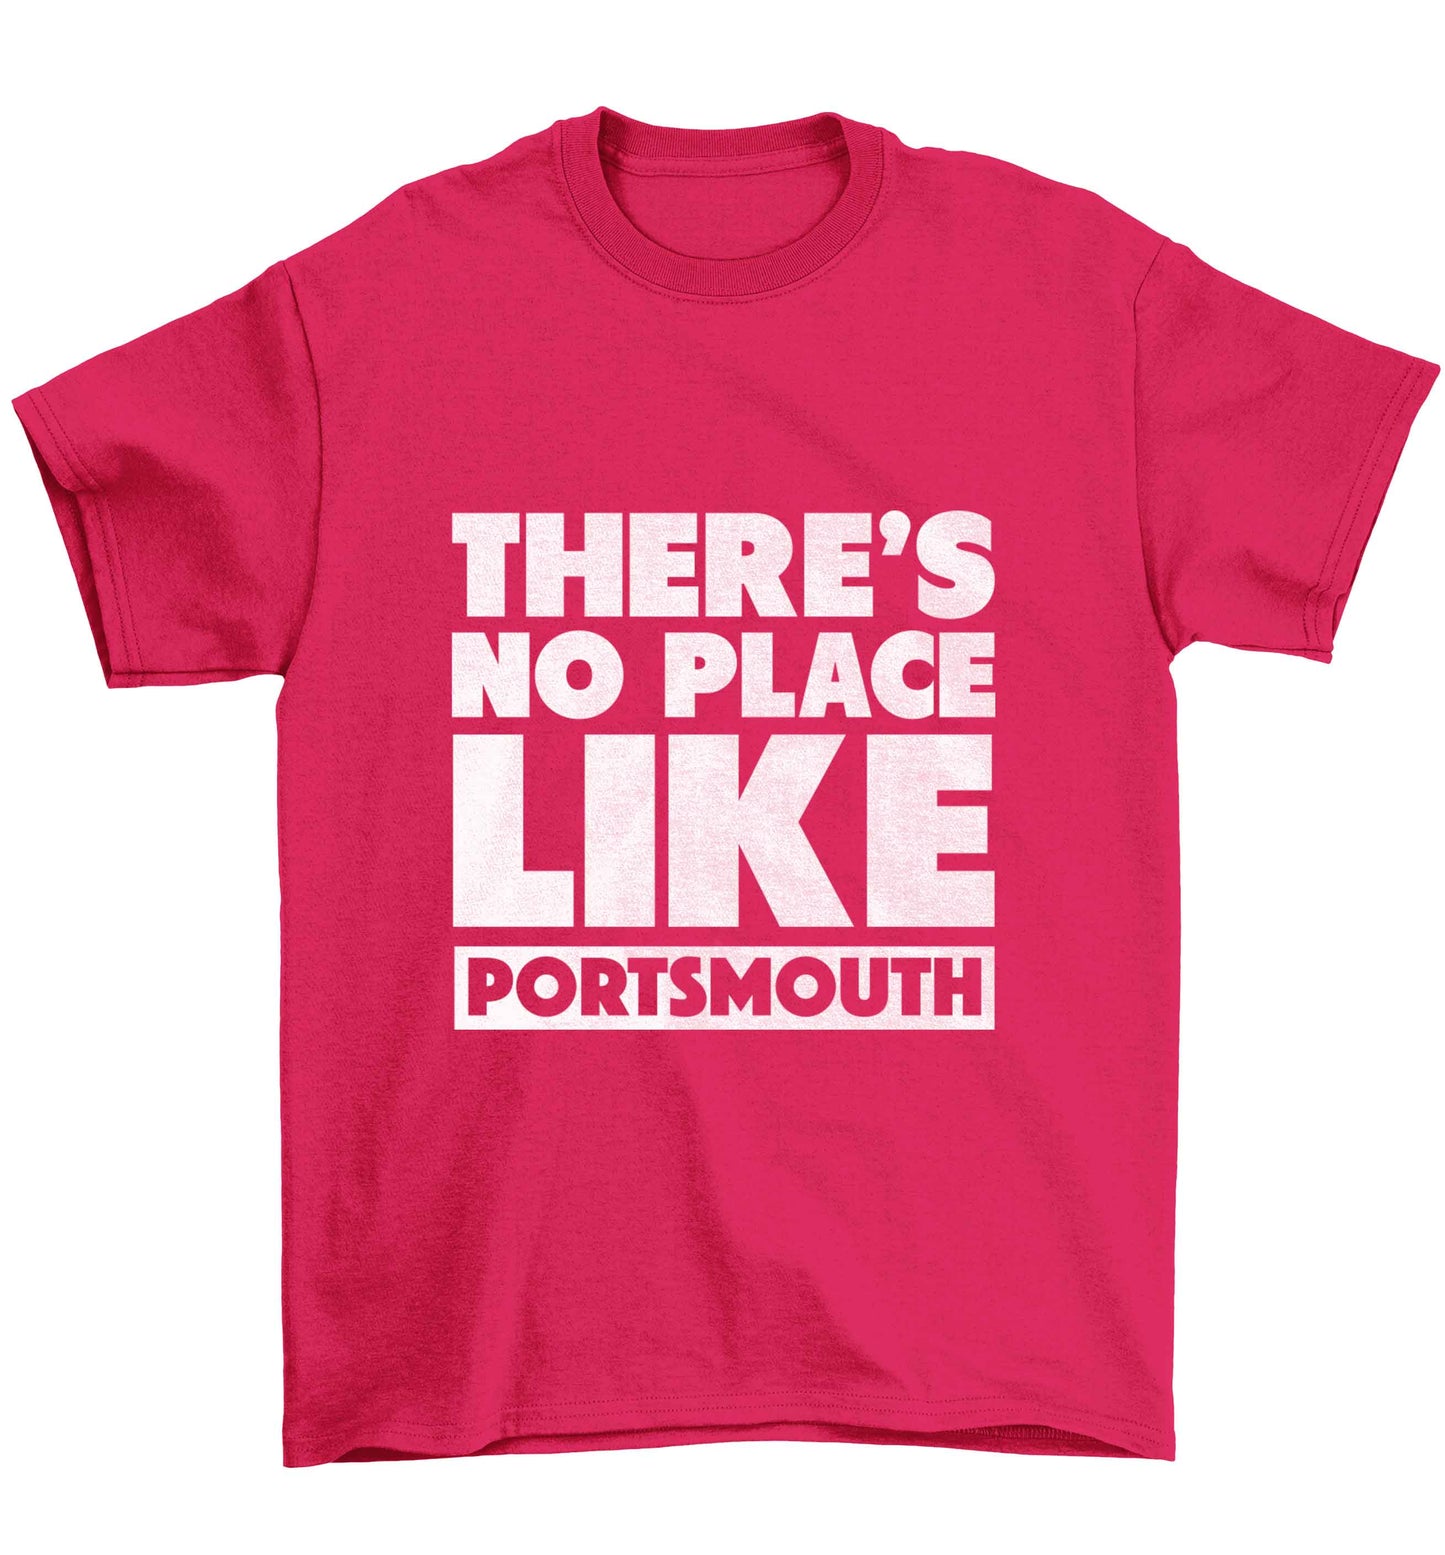 There's no place like Porstmouth Children's pink Tshirt 12-13 Years